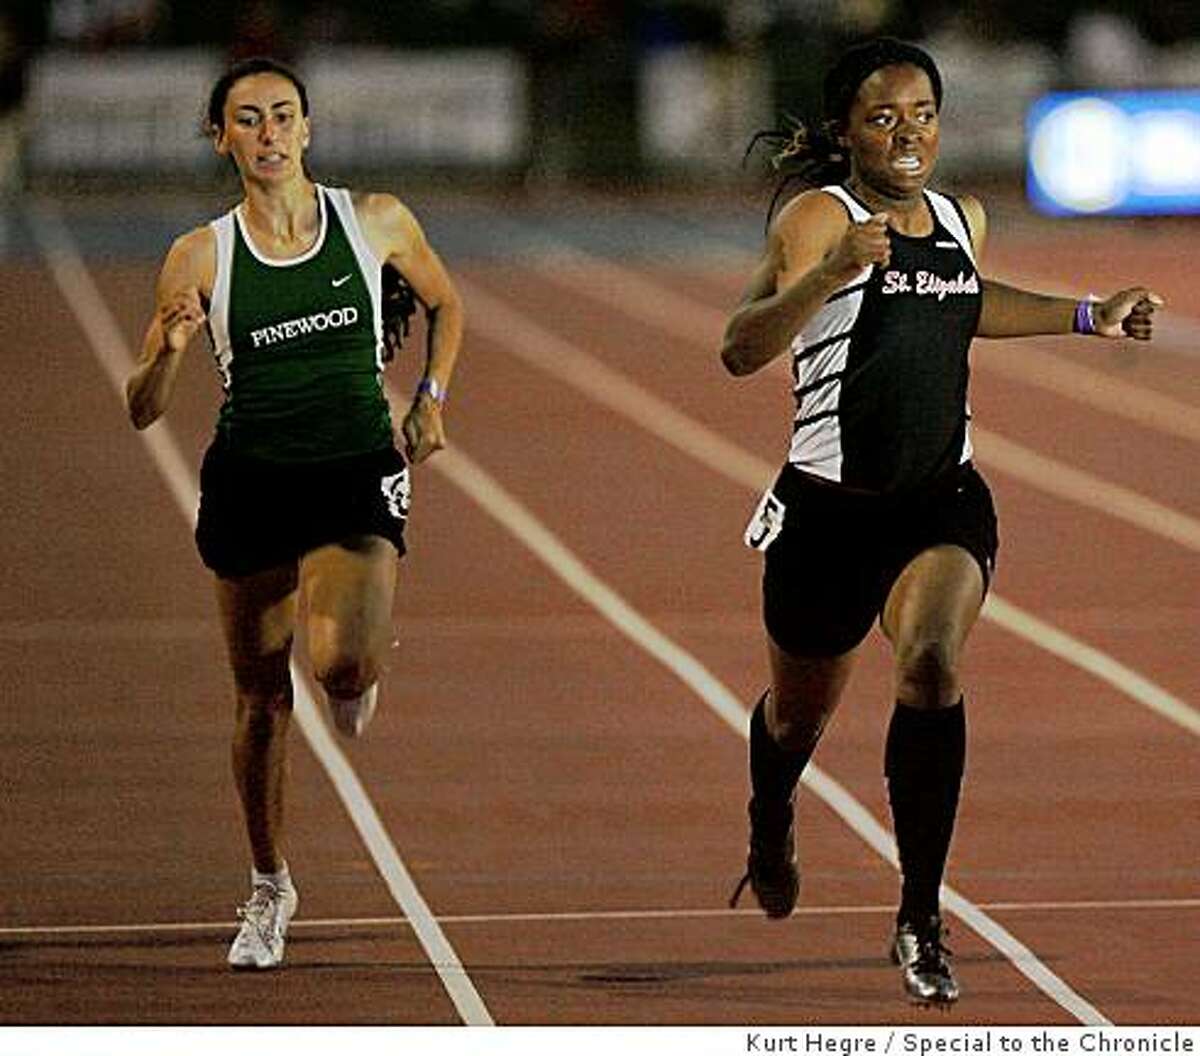 Ashton Purvis of Saint Elizabeth , right, passes Angela Gradiska of Pinewood to win the 200 meter race during the finals of the California State Track and Field Championships in Clovis, Ca Saturday May 6,2009.